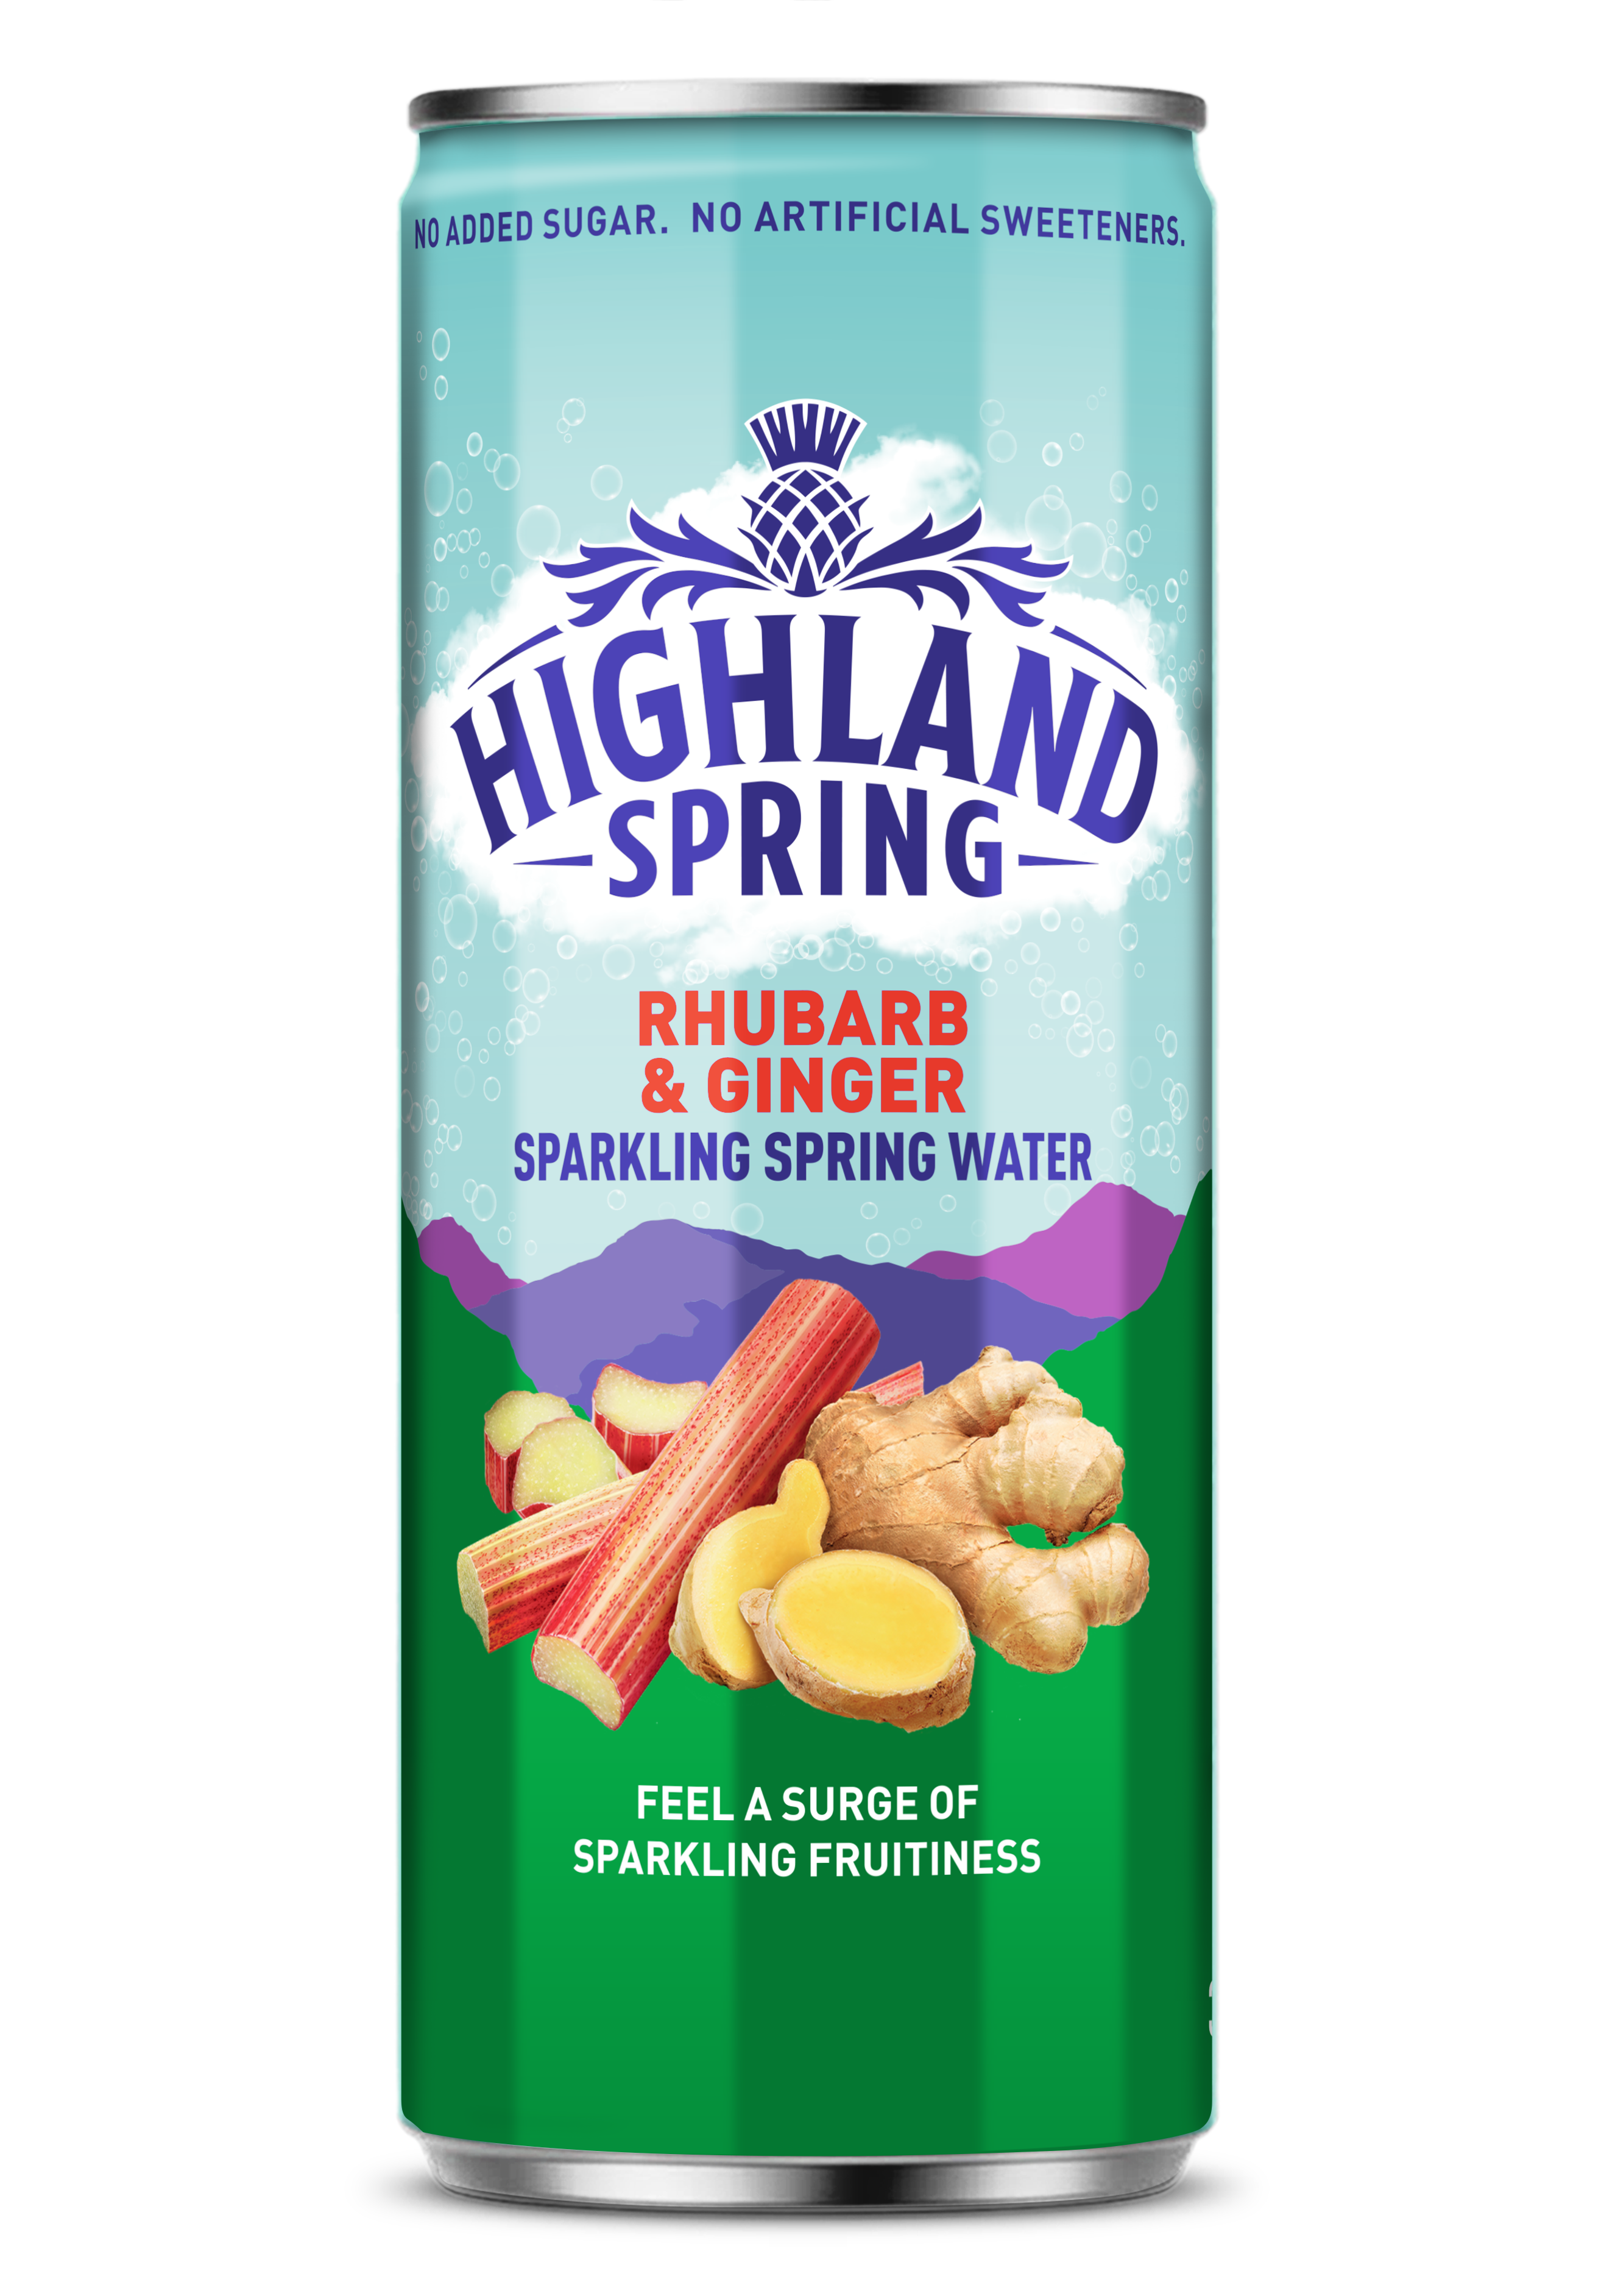 Highland Spring bursts into flavoured water with sparkling cans